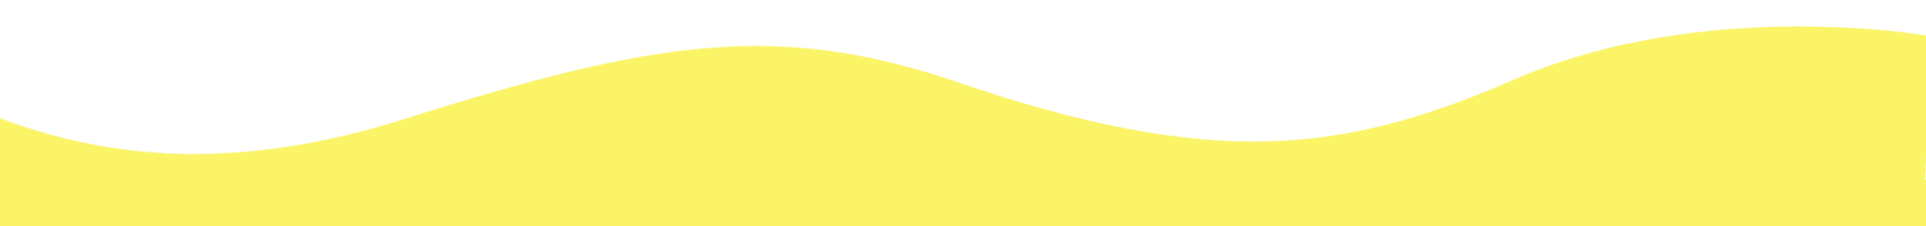 A green and yellow background with a wave